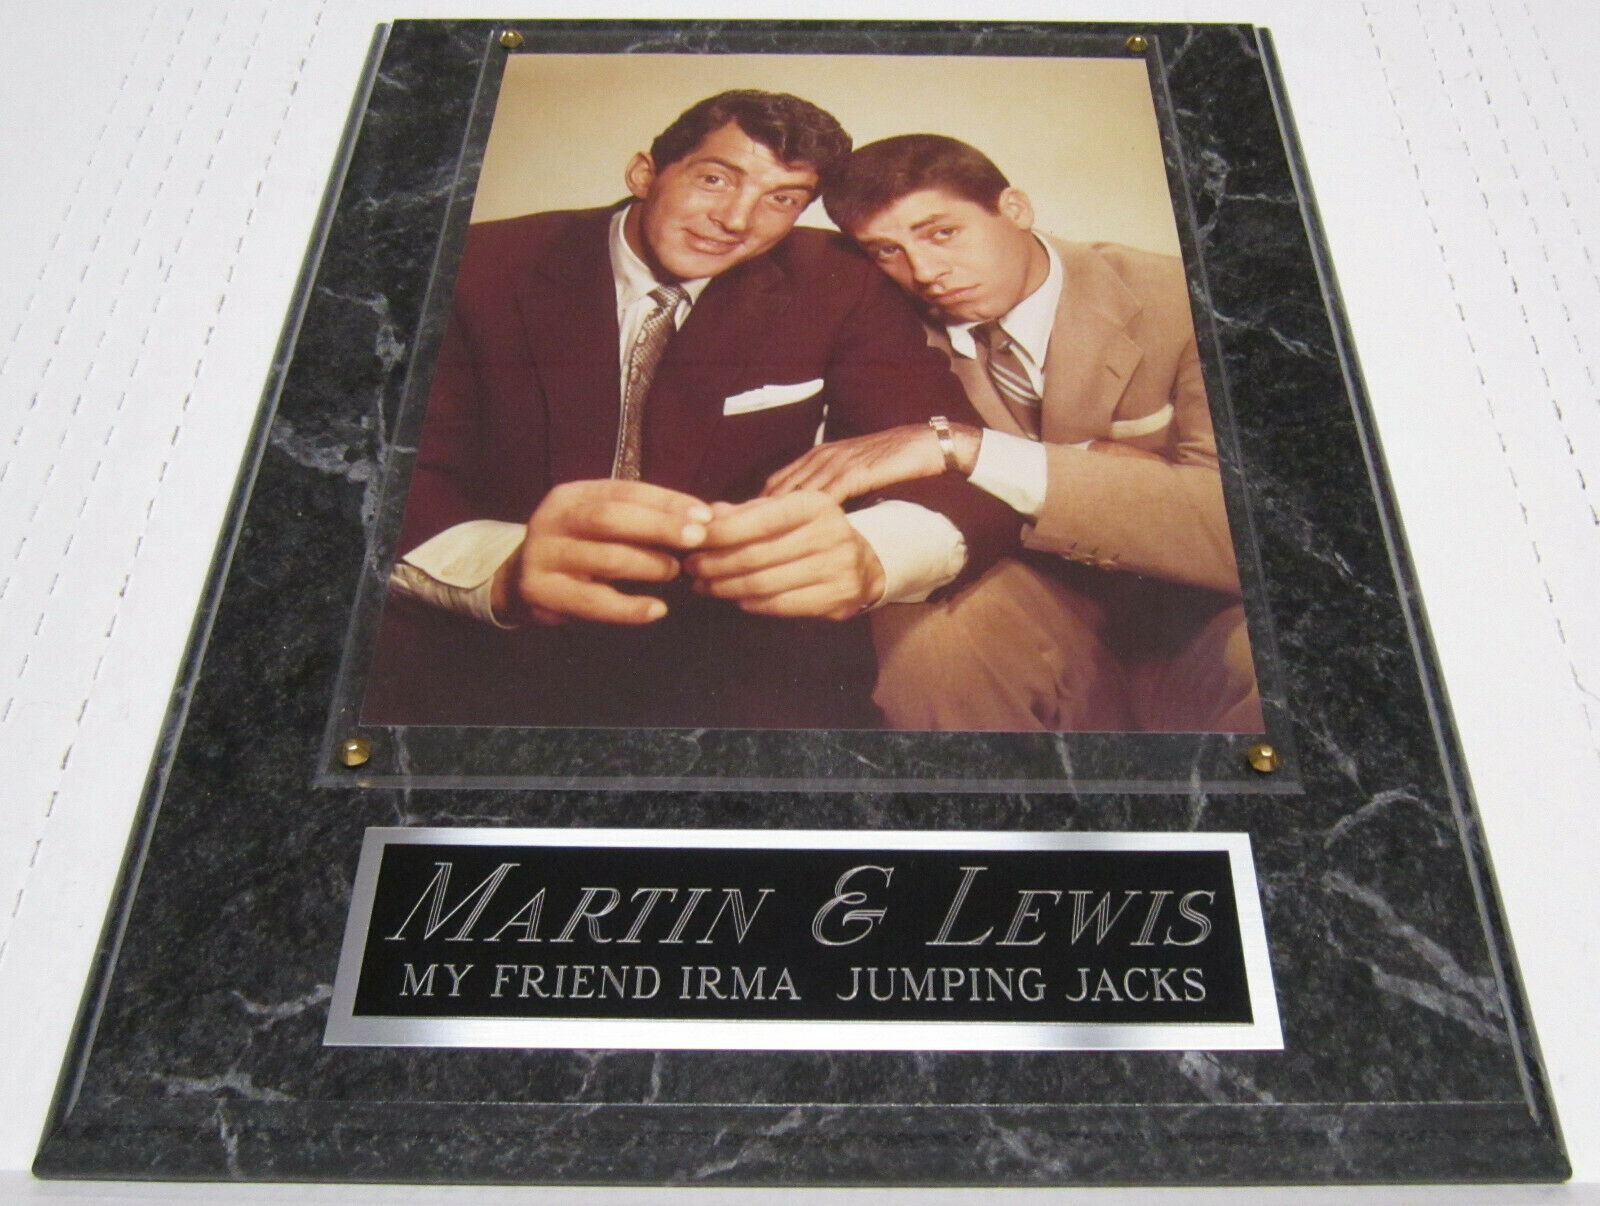 #1 Fan Dean Martin & Jerry Lewis Framed 8x10 Photo-12x15 Wall Plaque Display